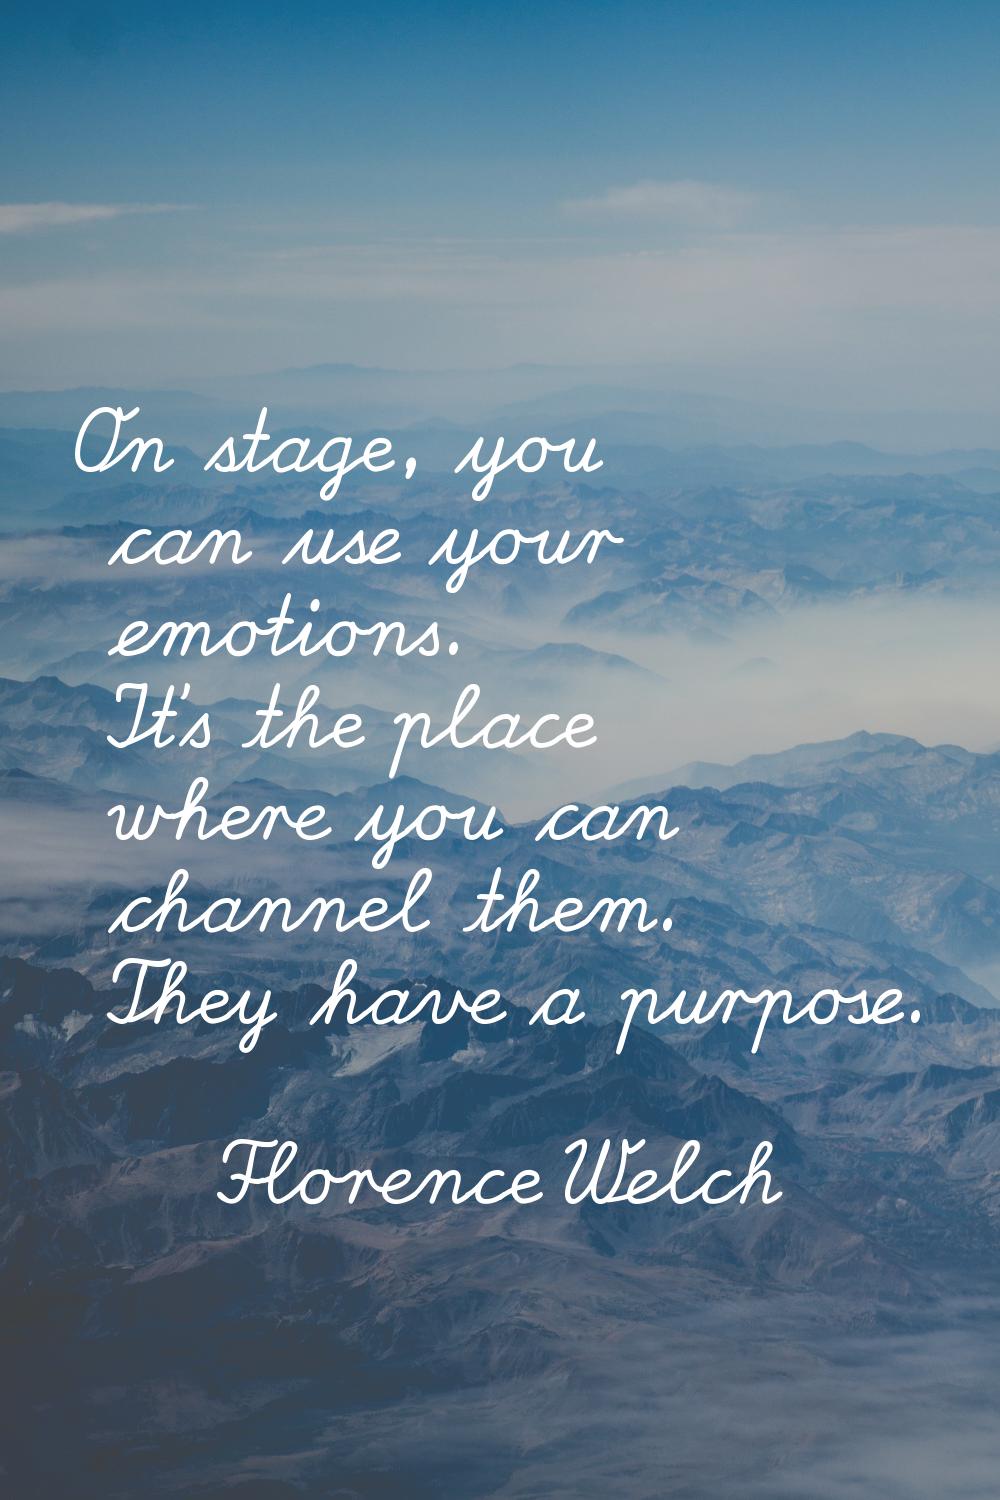 On stage, you can use your emotions. It's the place where you can channel them. They have a purpose